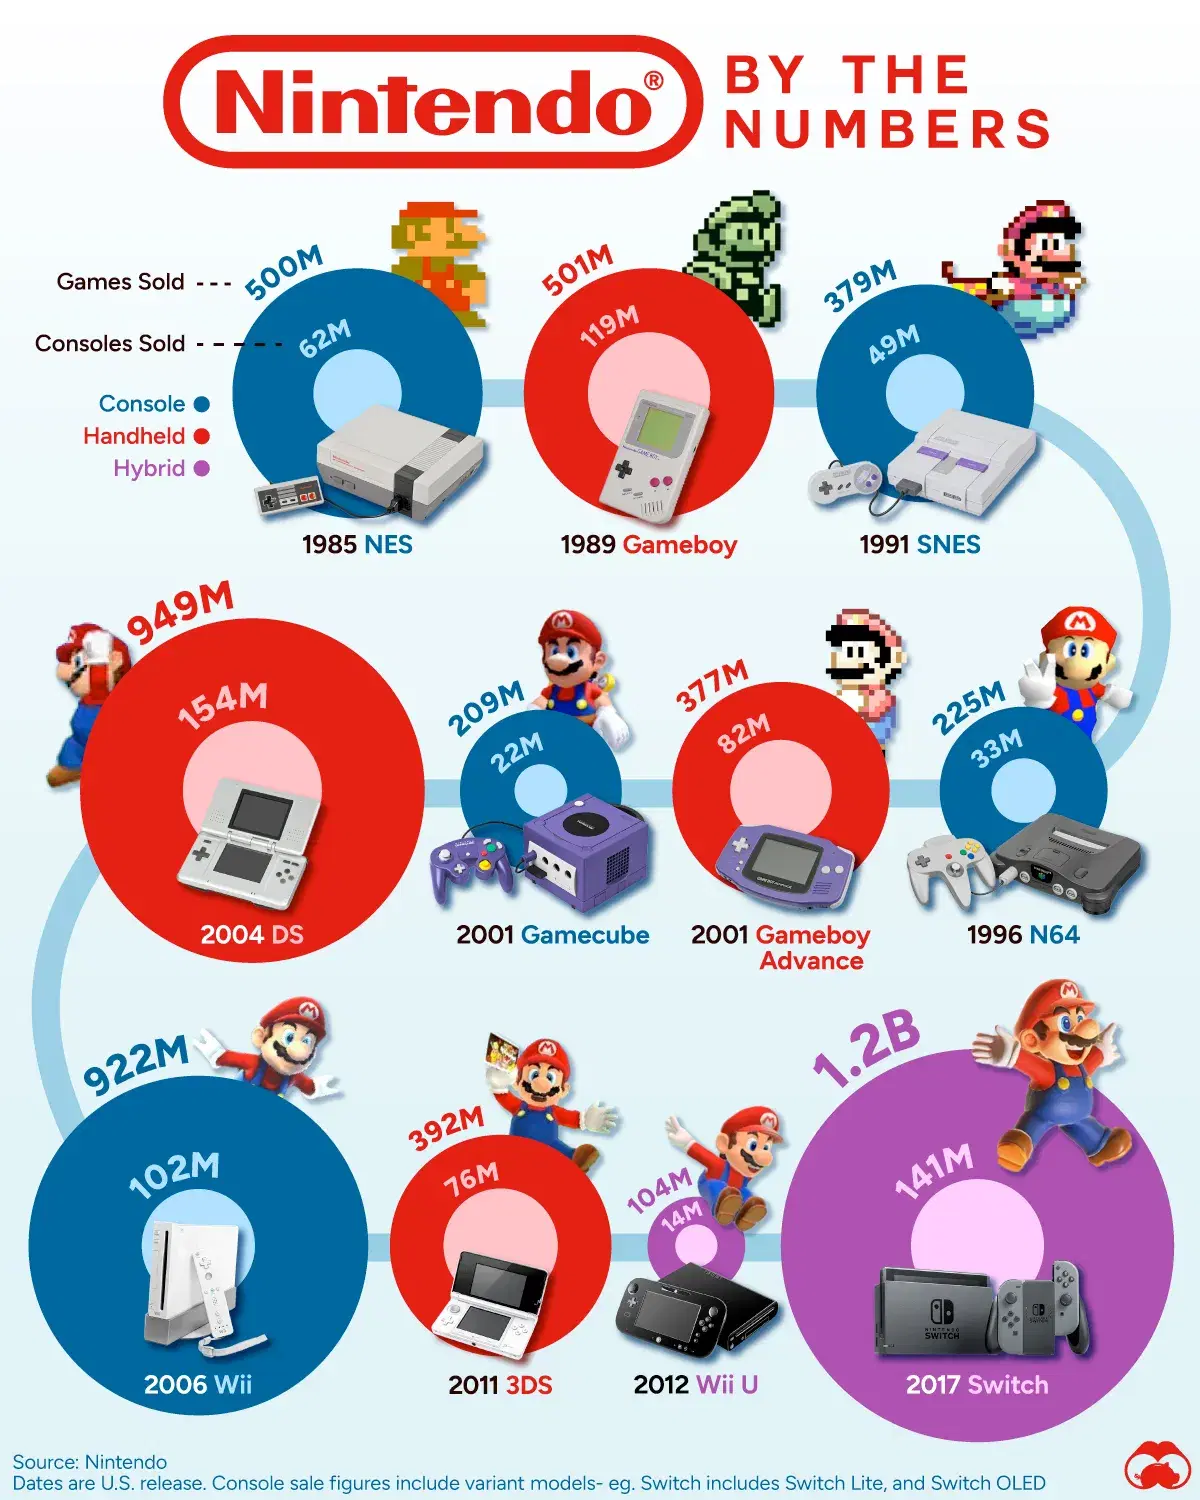 Nintendo Consoles by the Numbers 🎮